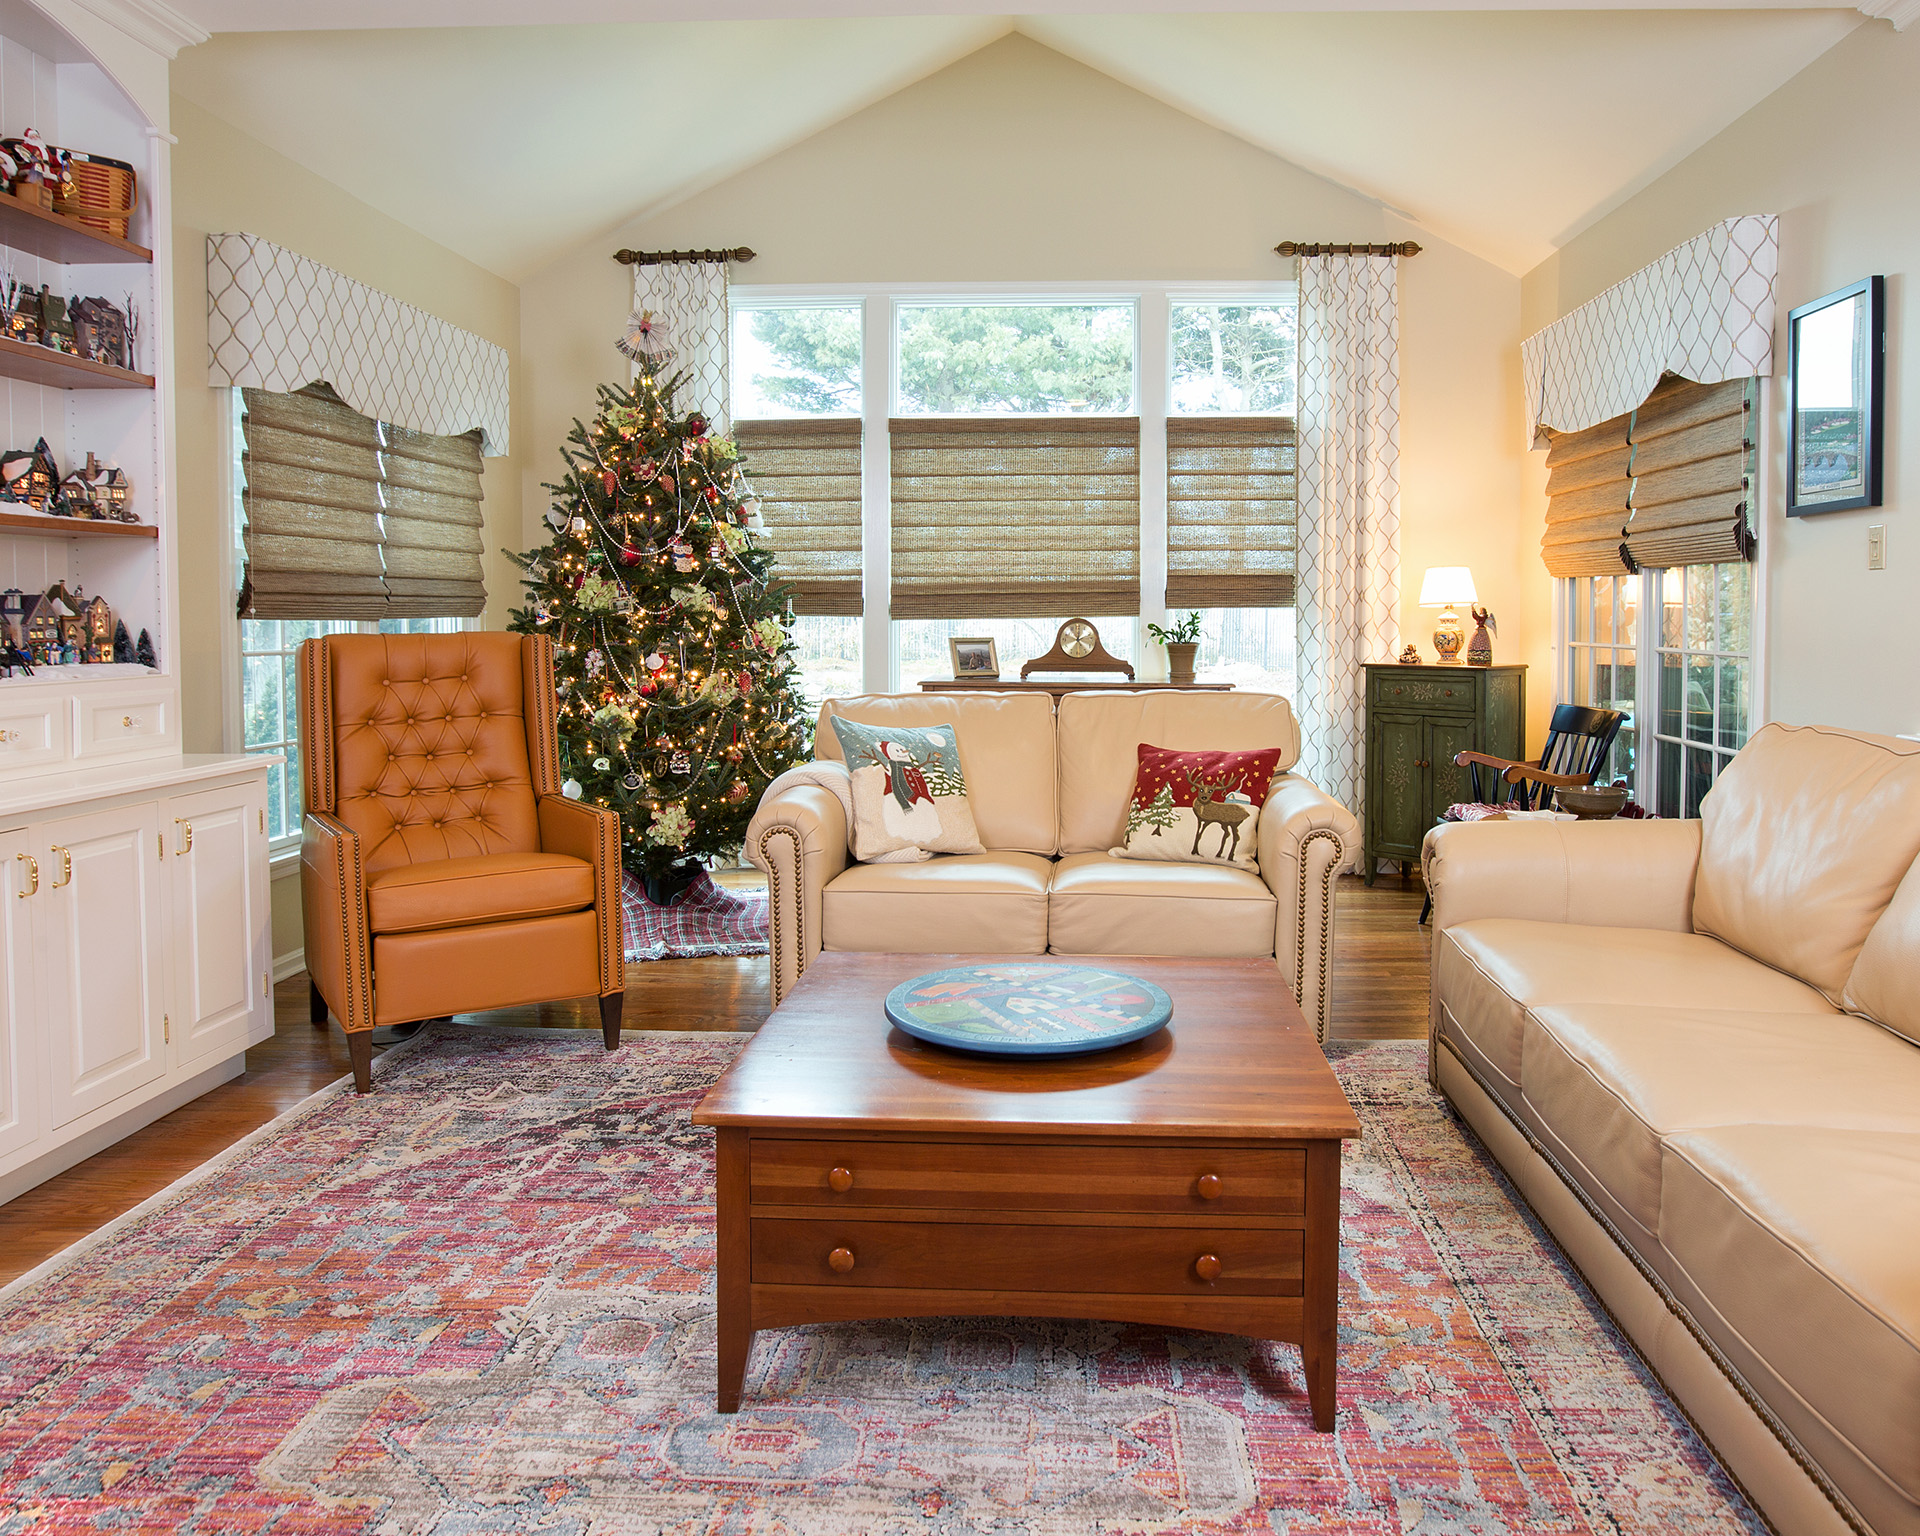 Prepping Your Home For The 2020 Holiday Season